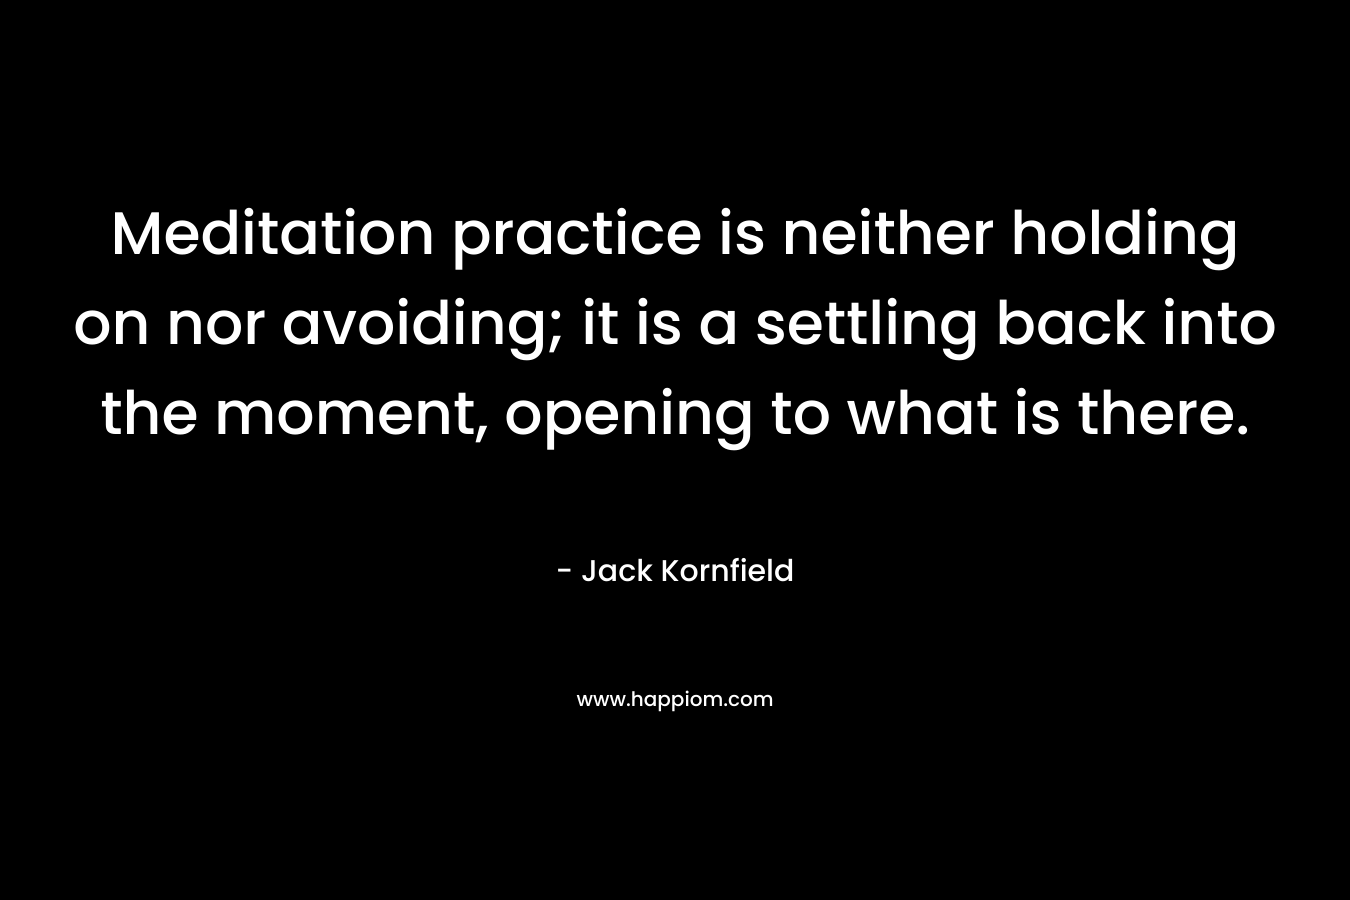 Meditation practice is neither holding on nor avoiding; it is a settling back into the moment, opening to what is there.